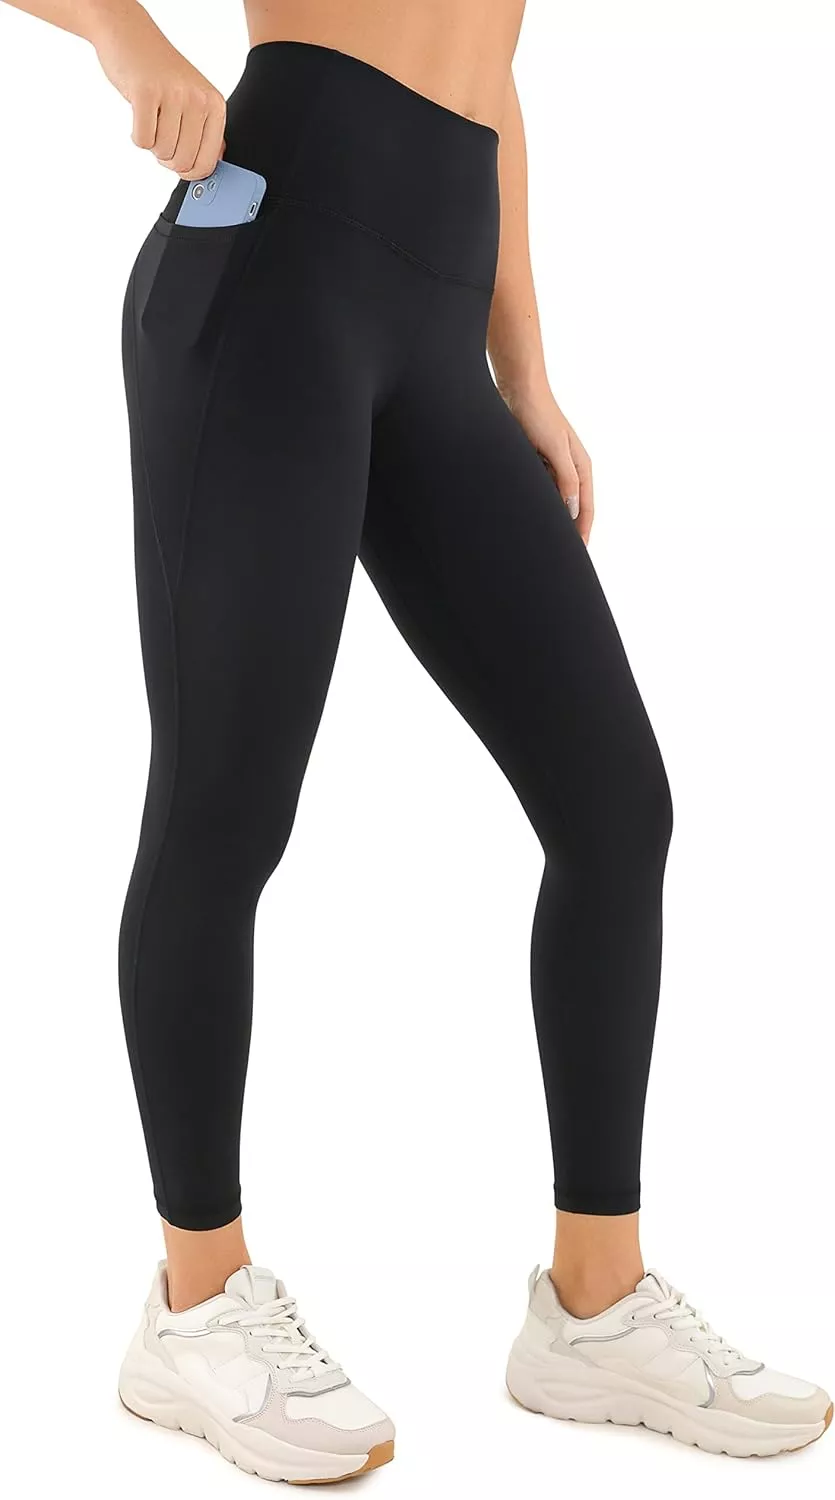 CRZ YOGA Butterluxe High Waisted Lounge Legging 25 - Workout Leggings for  Women Buttery Soft Yoga Pants Black XX-Small : Clothing, Shoes & Jewelry, crz  yoga leggings